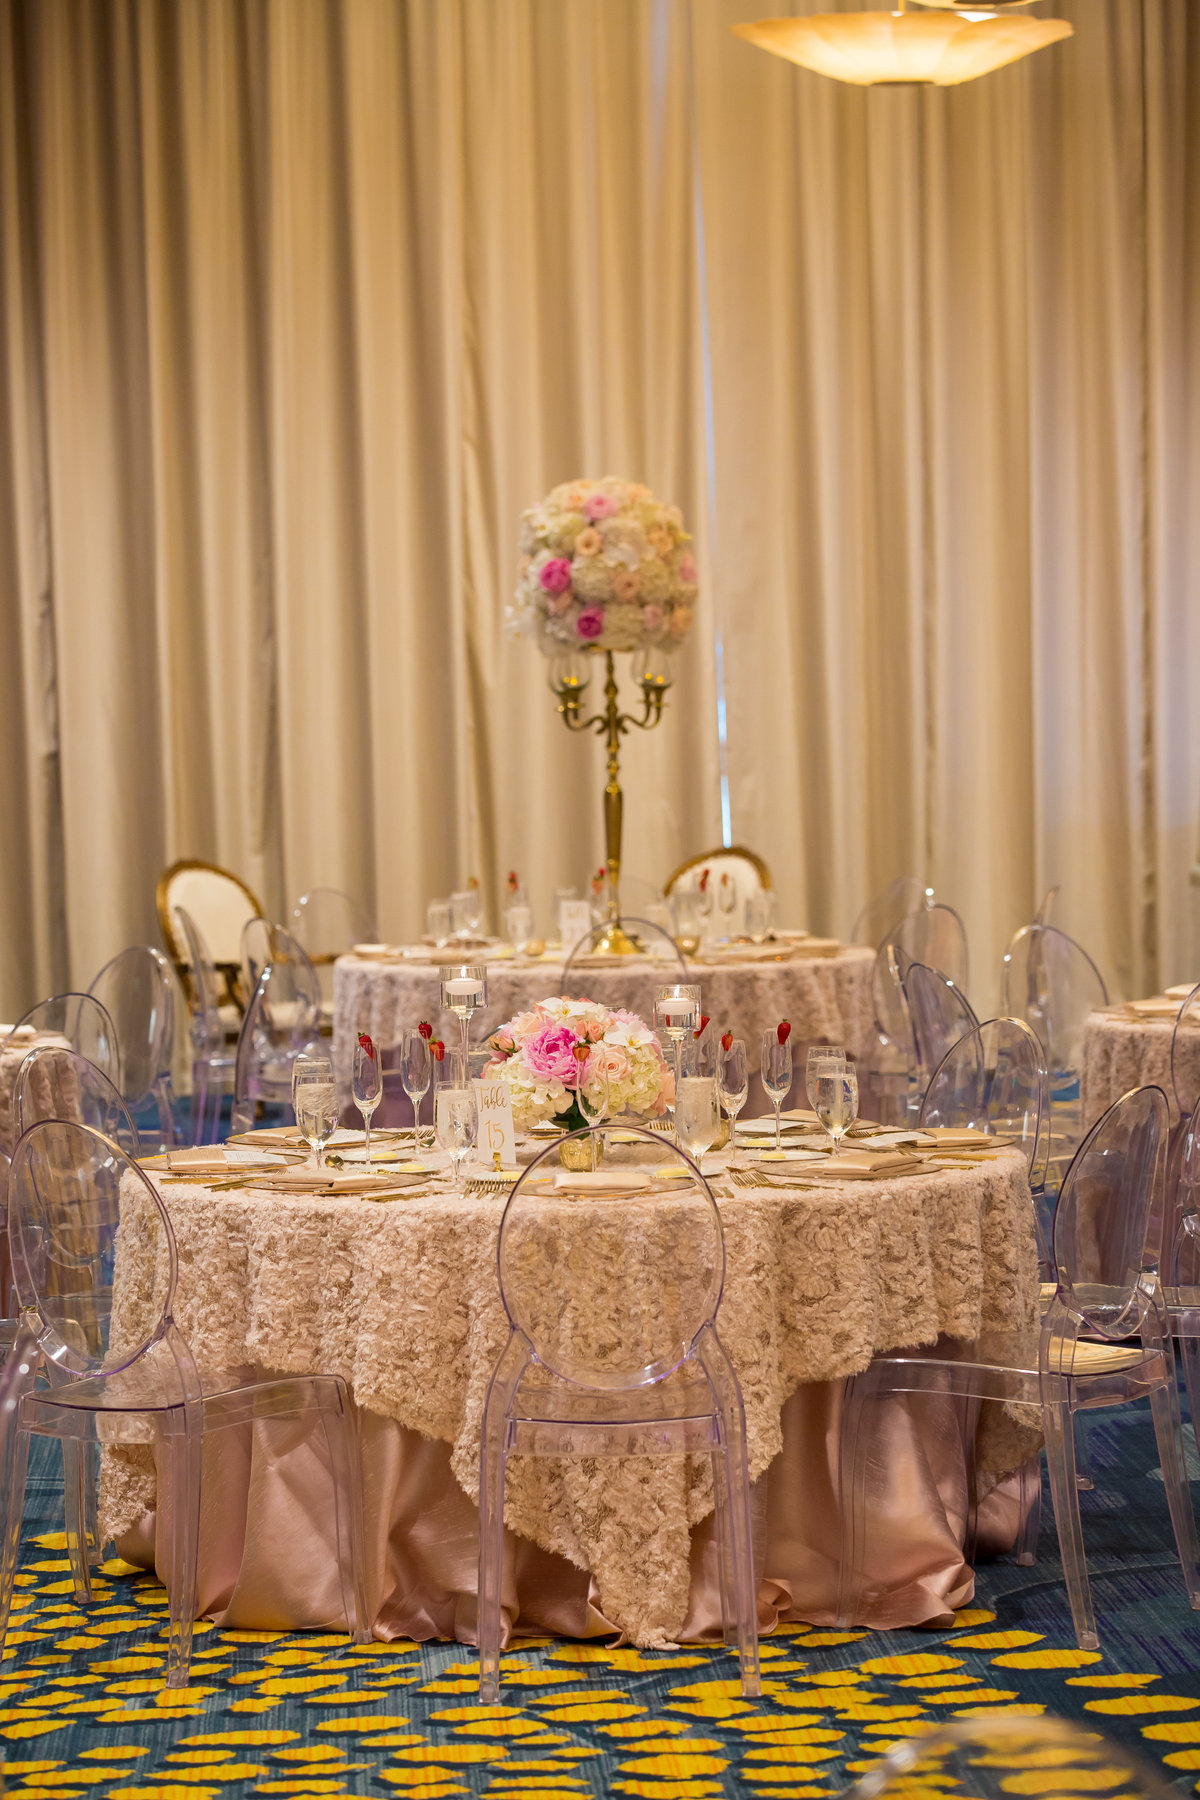 Beauty and the Beast wedding at Opal Sands. tampa wedding planners. blush and gold wedding. tandy wedding. tampa wedding florist. tampa wedding photographers. ghost chairs. gold chargers. A chair affair